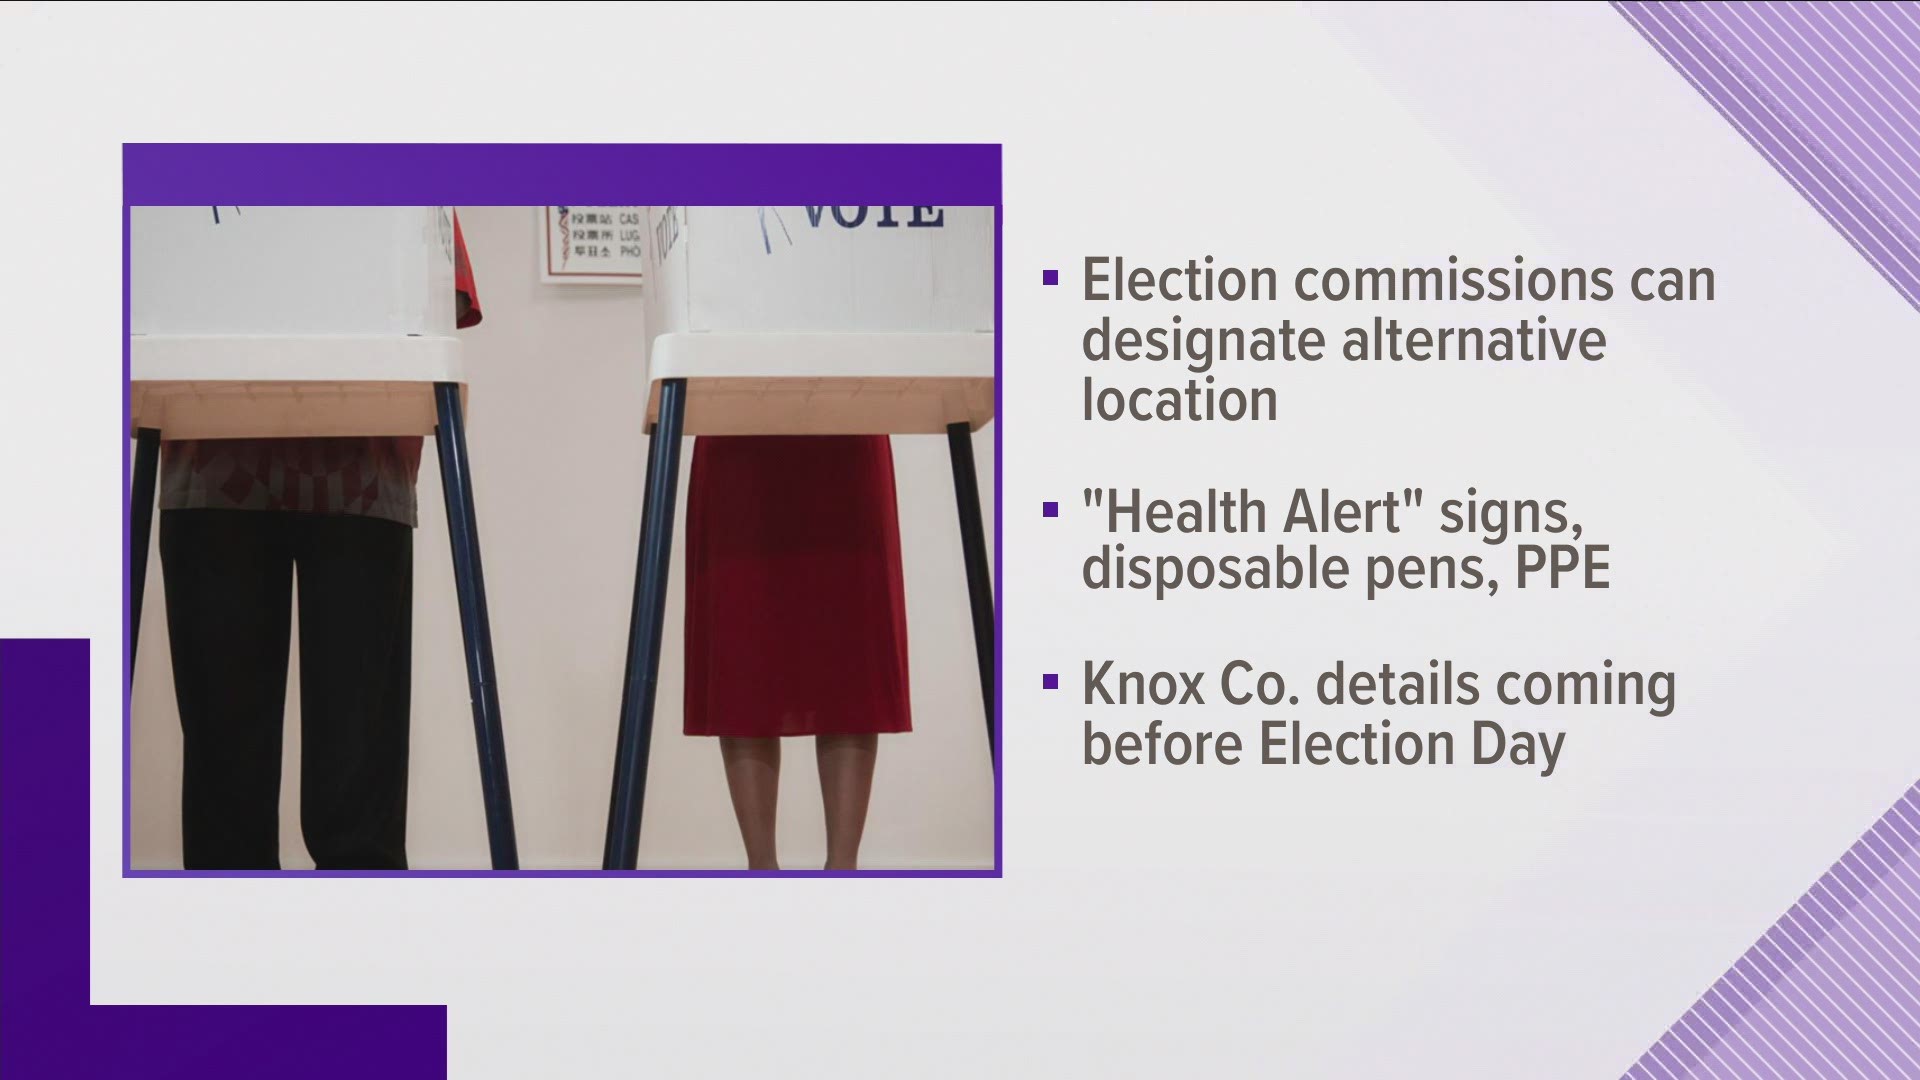 Voters with COVID-19 symptoms will vote at a specific location on Election Day, to keep voters safe while casting their ballots.